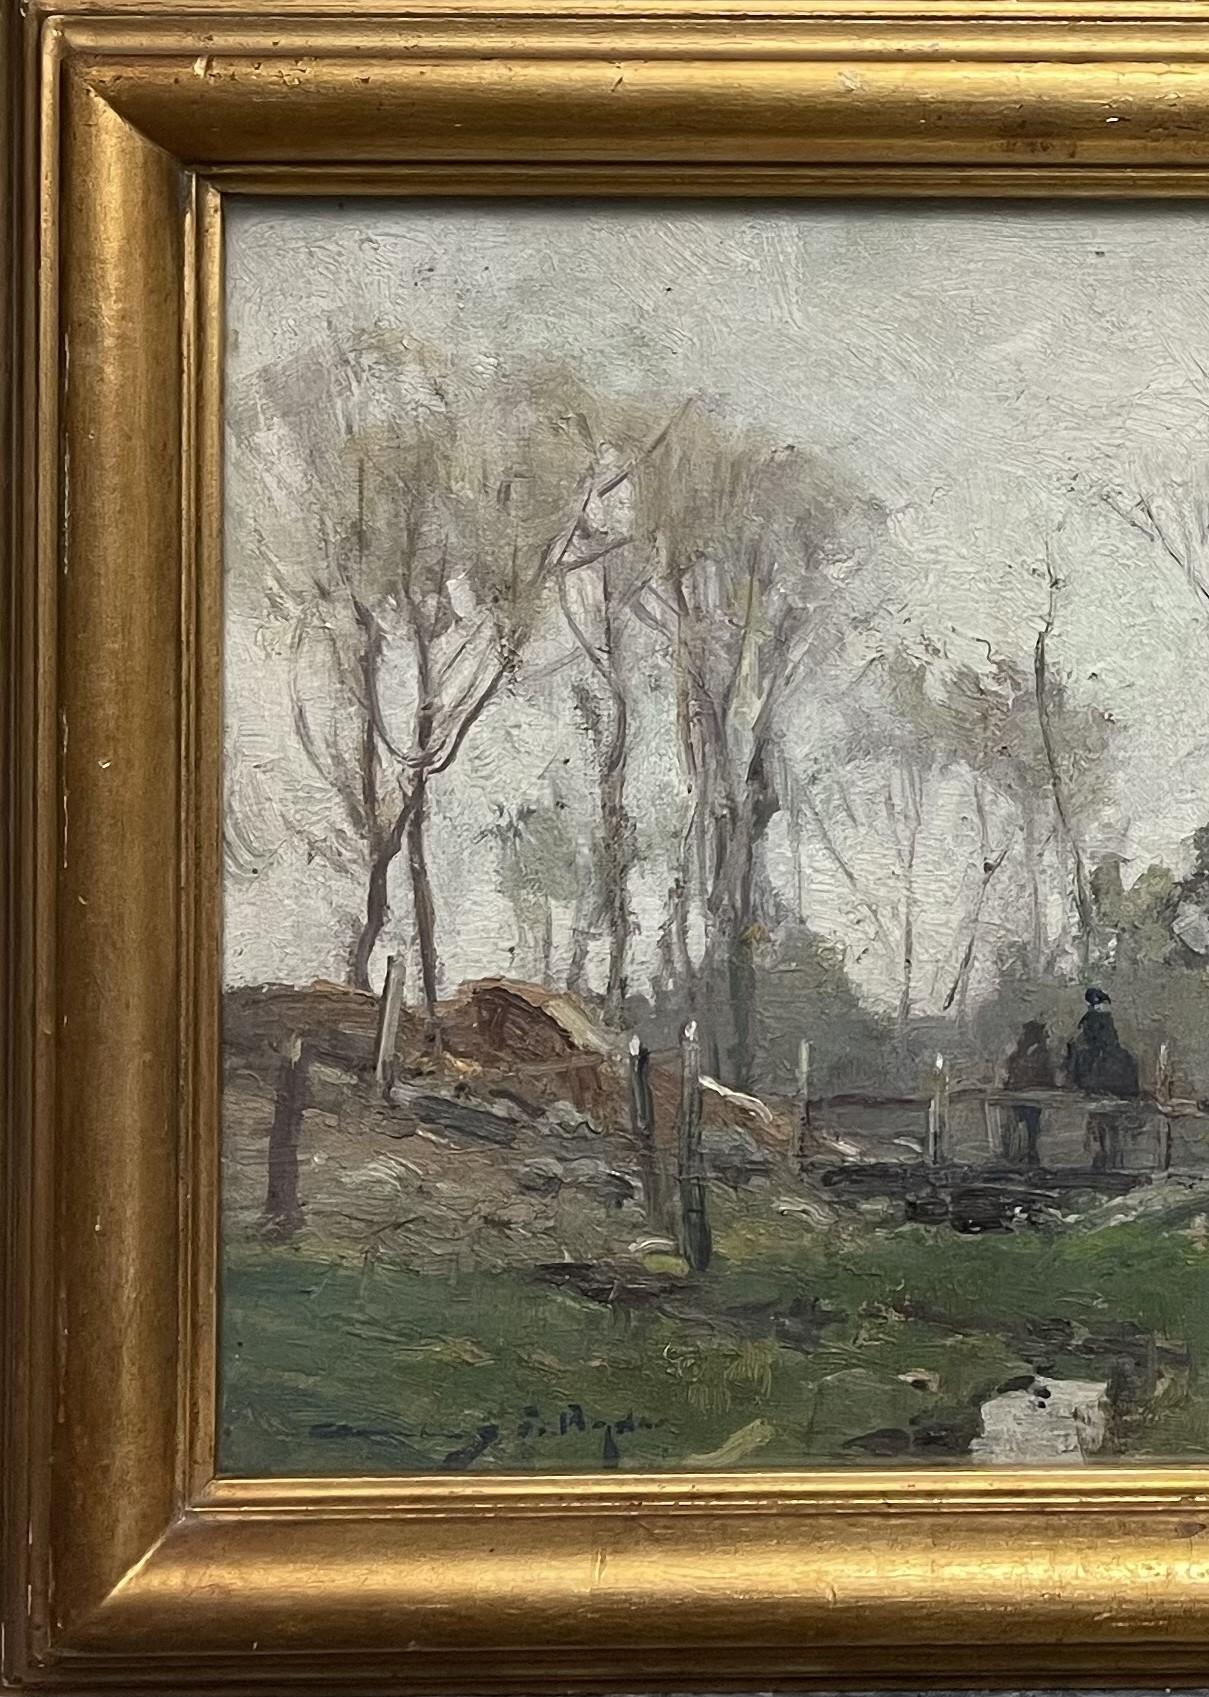 CHAUNCEY FOSTER RYDER (American, 1868-1949), landscape with figures on a bridge, oil on canvas, signed lower left. Framed under glass. Minor craquelure, dirt and grime. Possible label remnant from William Macbeth Gallery attached. Ryder's NYC